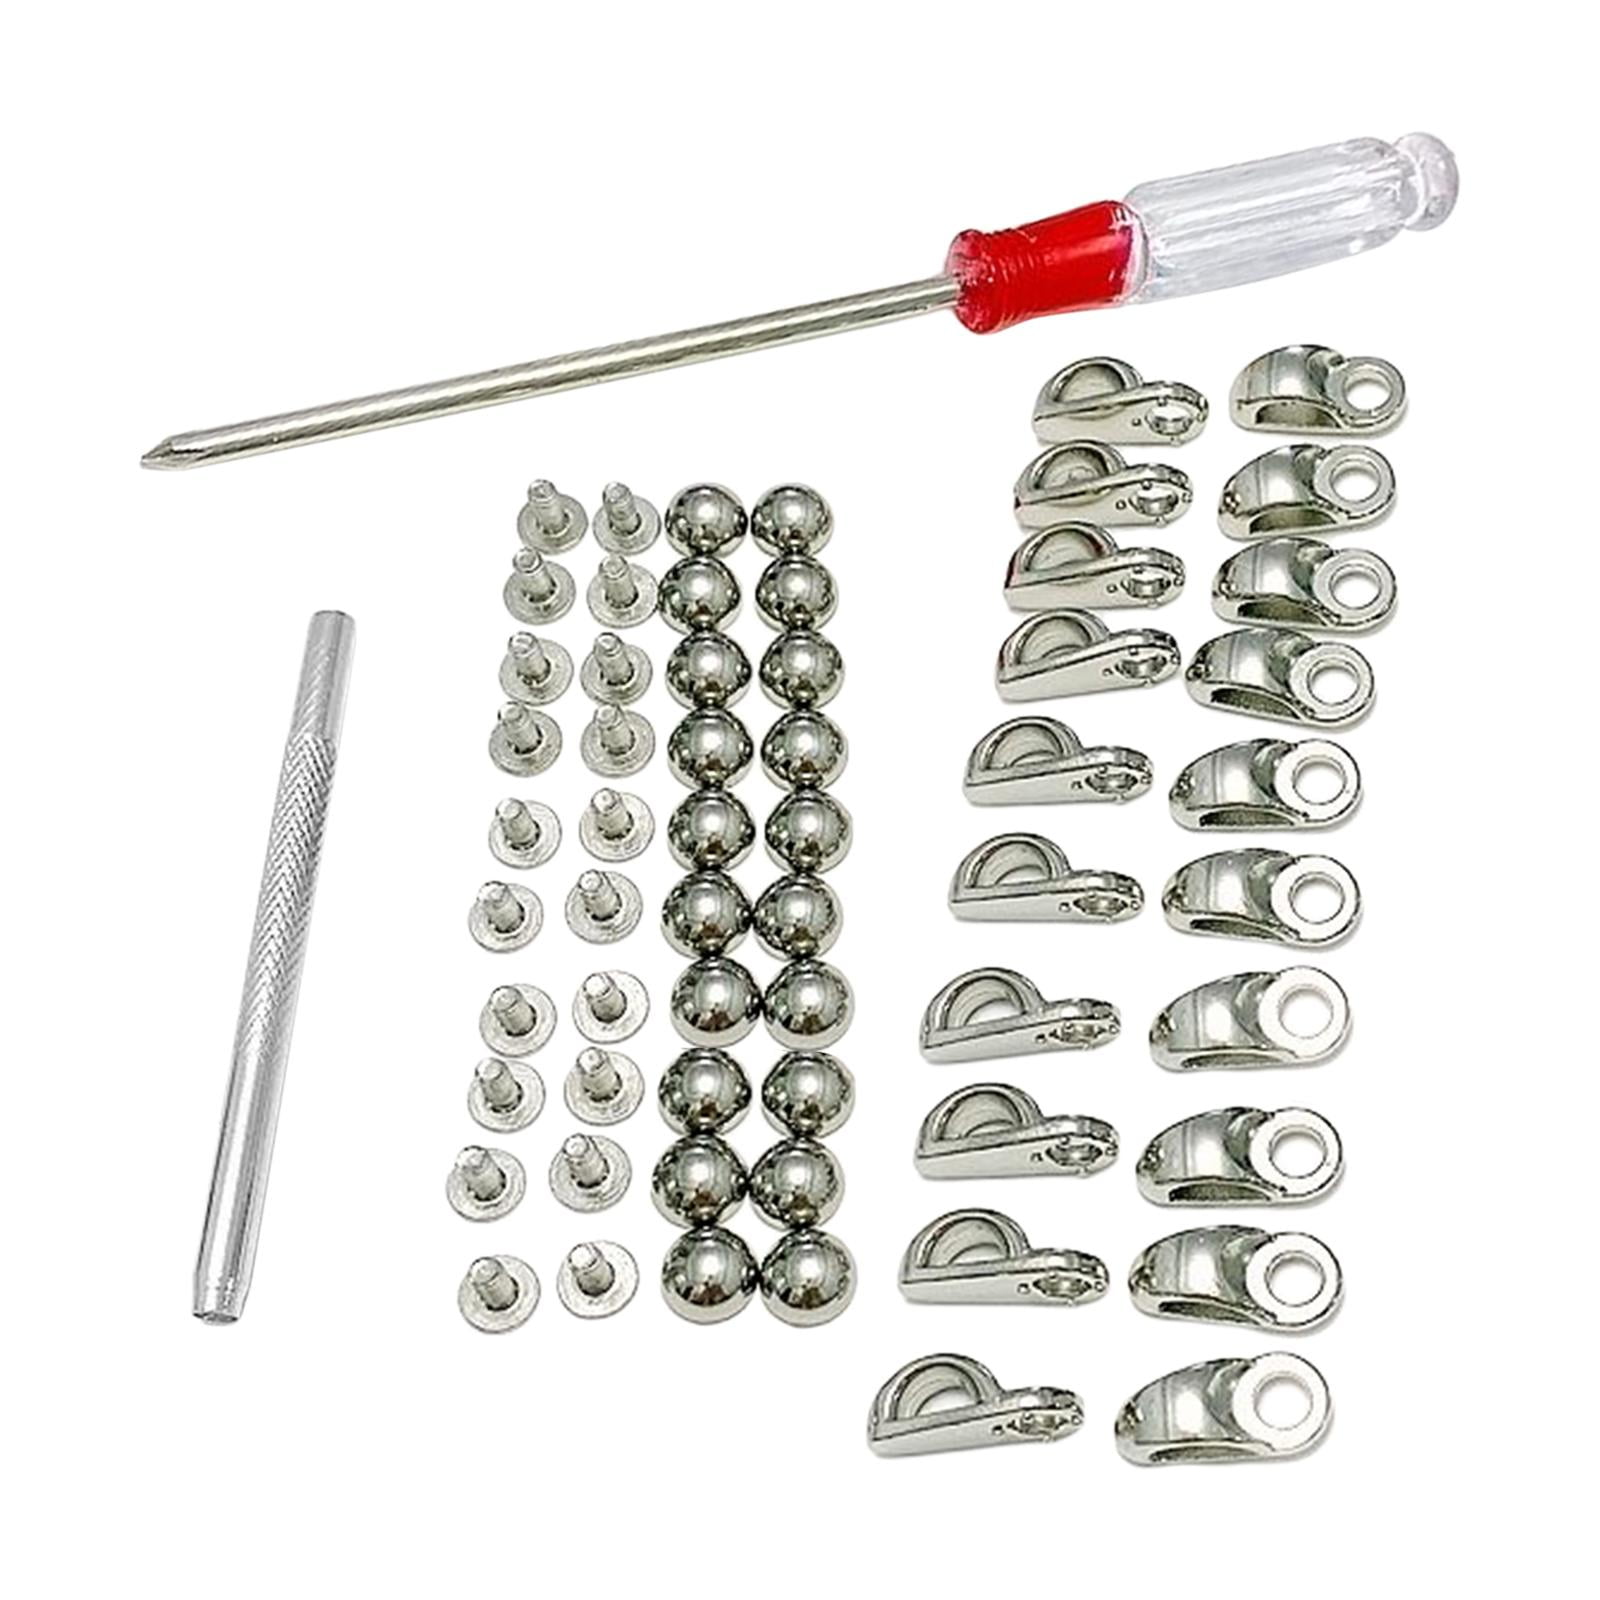 Boot Hook Repair Kit Boot Eyelet Hooks 9×7×2 20pcs Set Boot Hooks Lace  Fittings with Rivets for Repair Camp Hike Climb Accessories